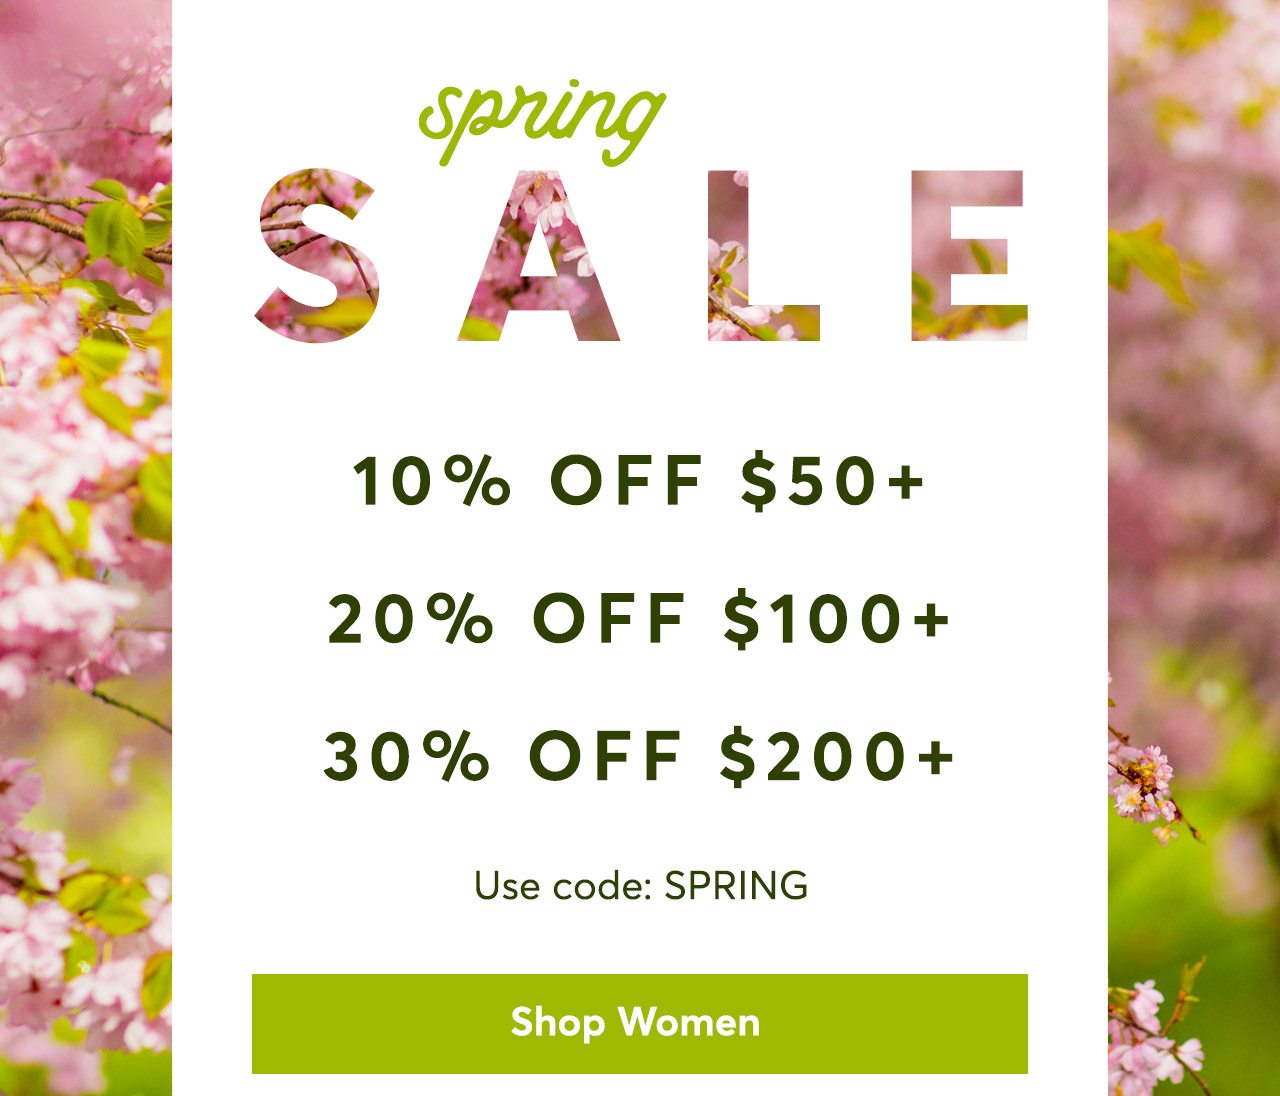 Spring Sale: 10% off $50+, 20% off $100+, 30% off $200 with code SPRING. Shop Women